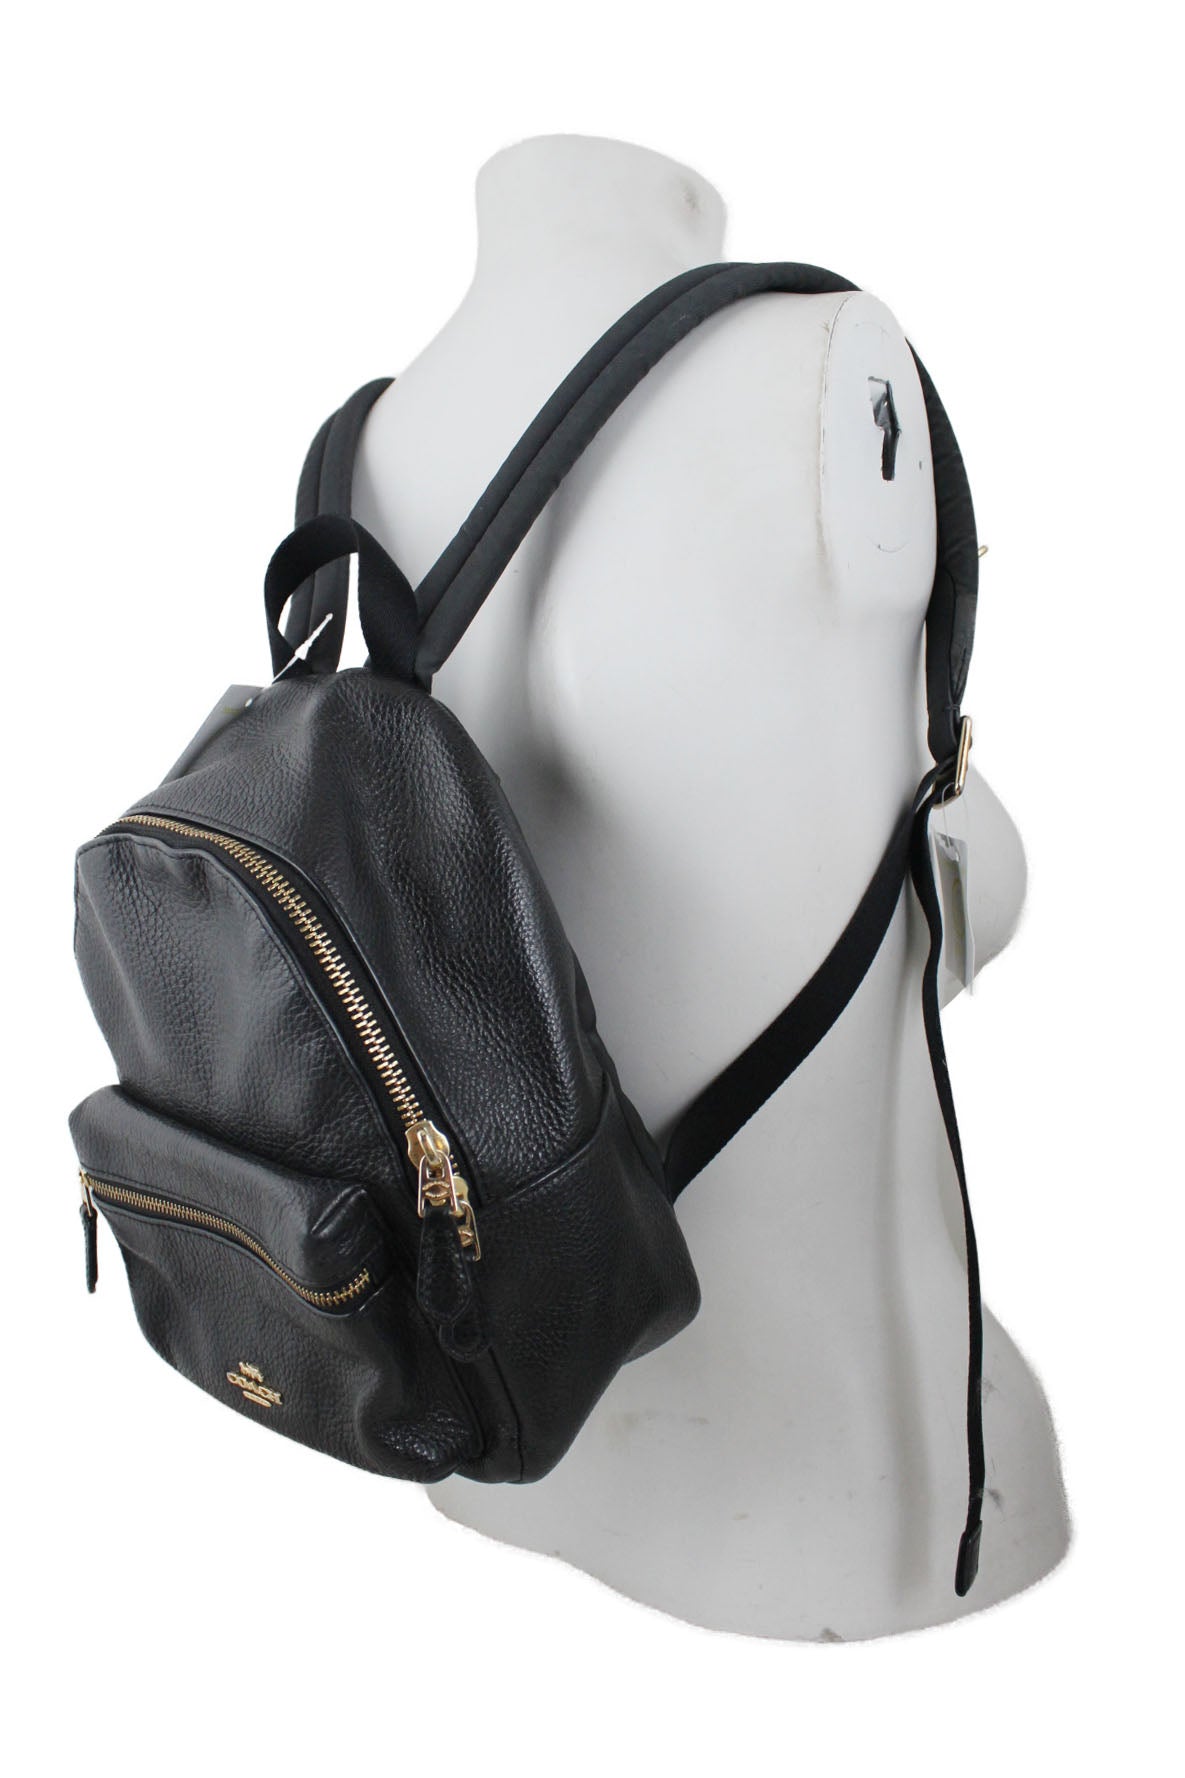 backpack wore by mannequin for sizing. 